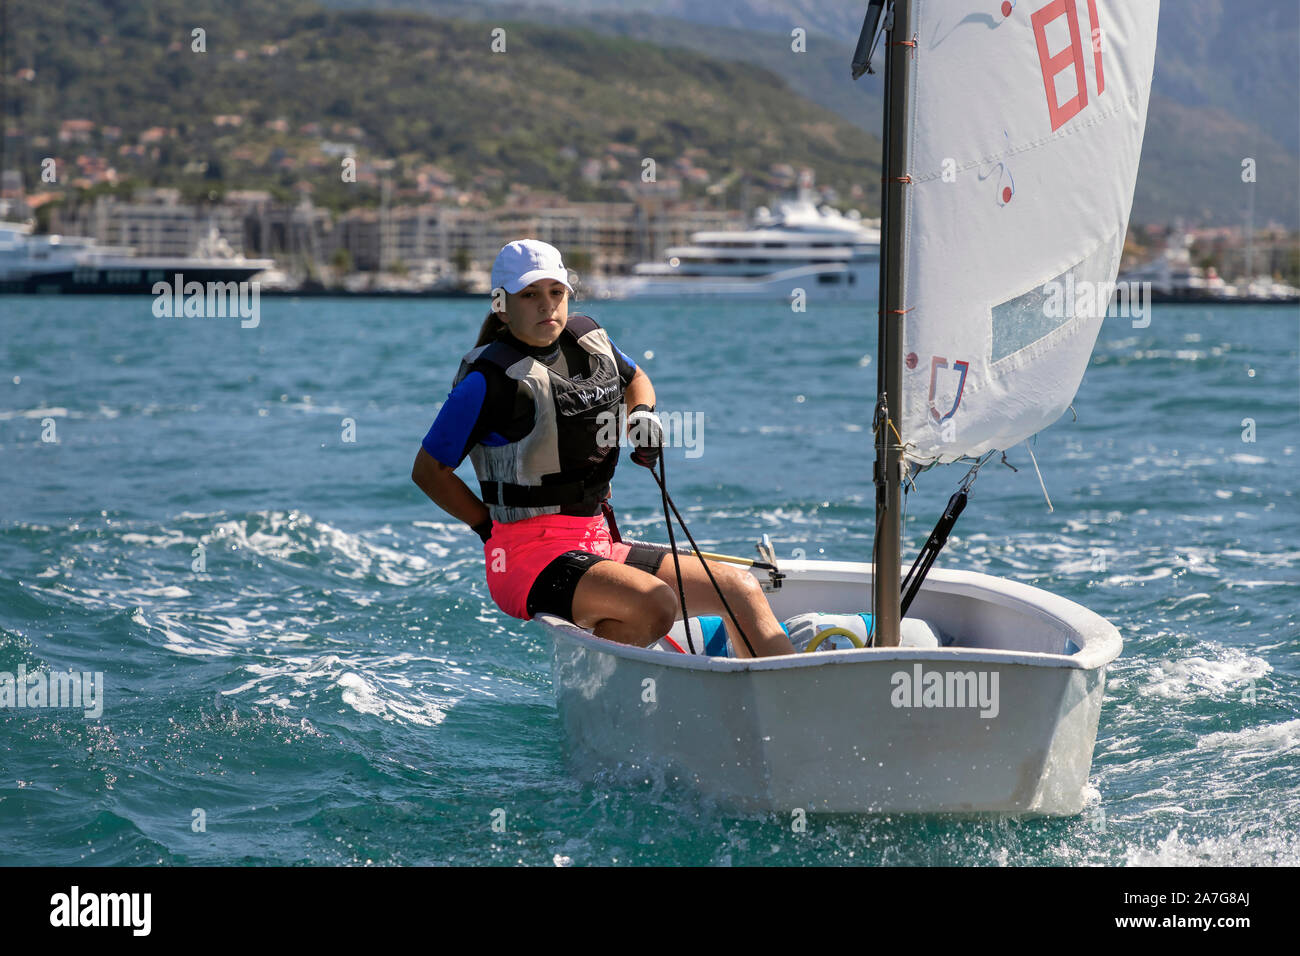 Montenegro, Sep 20, 2019: Teenage girl sailing in Optimist Class dinghy during the regatta in Kotor Bay Stock Photo